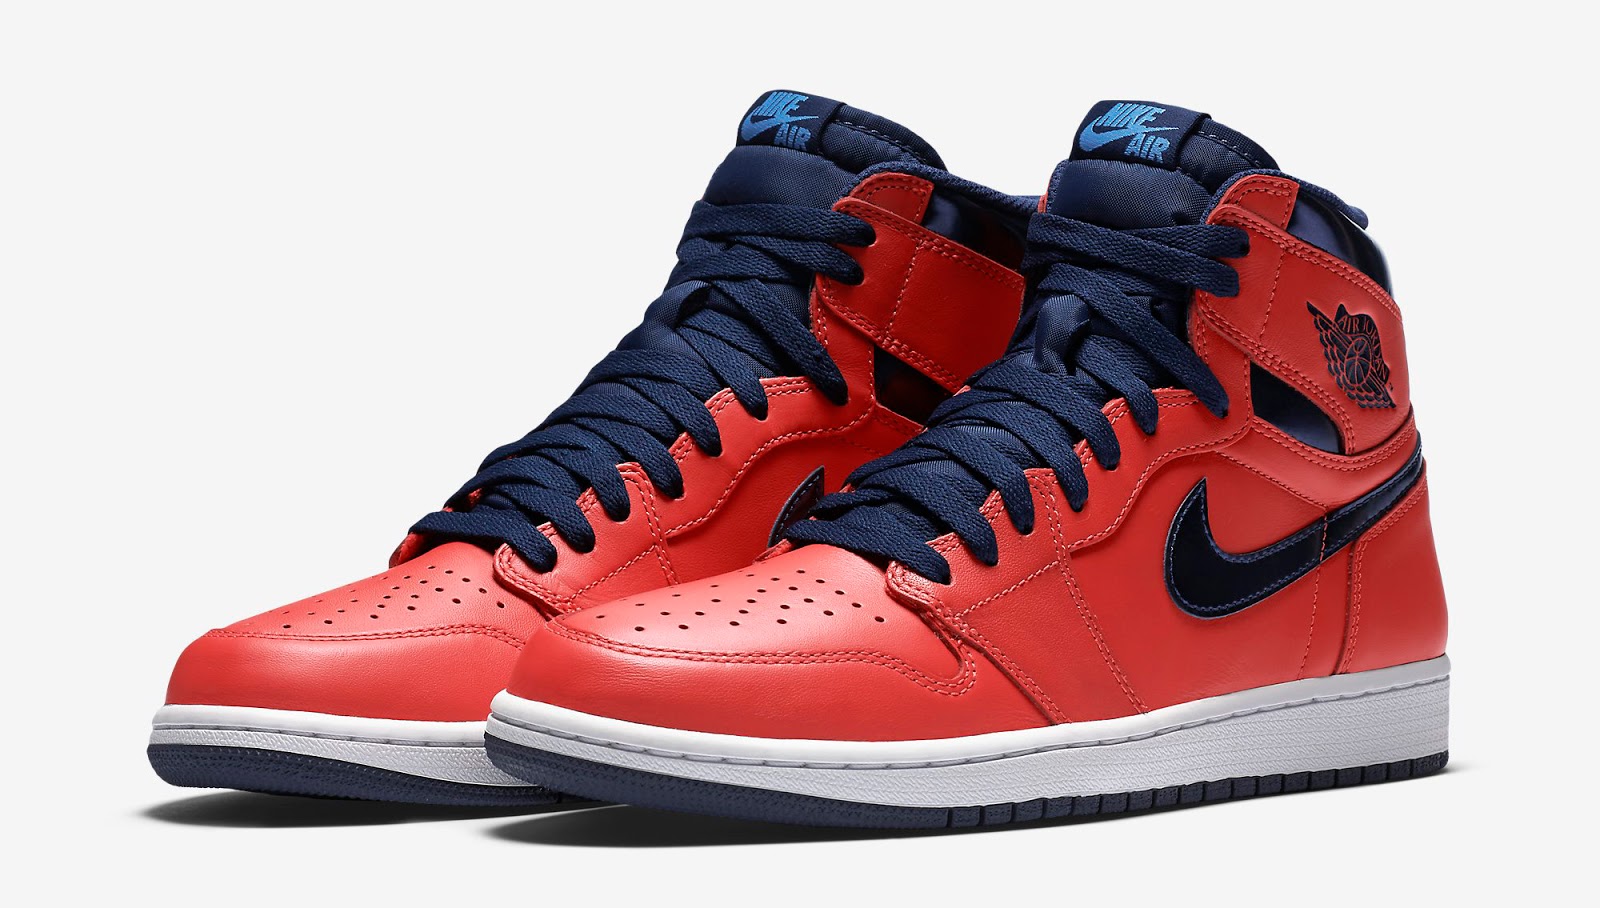 retro 1 blue and red